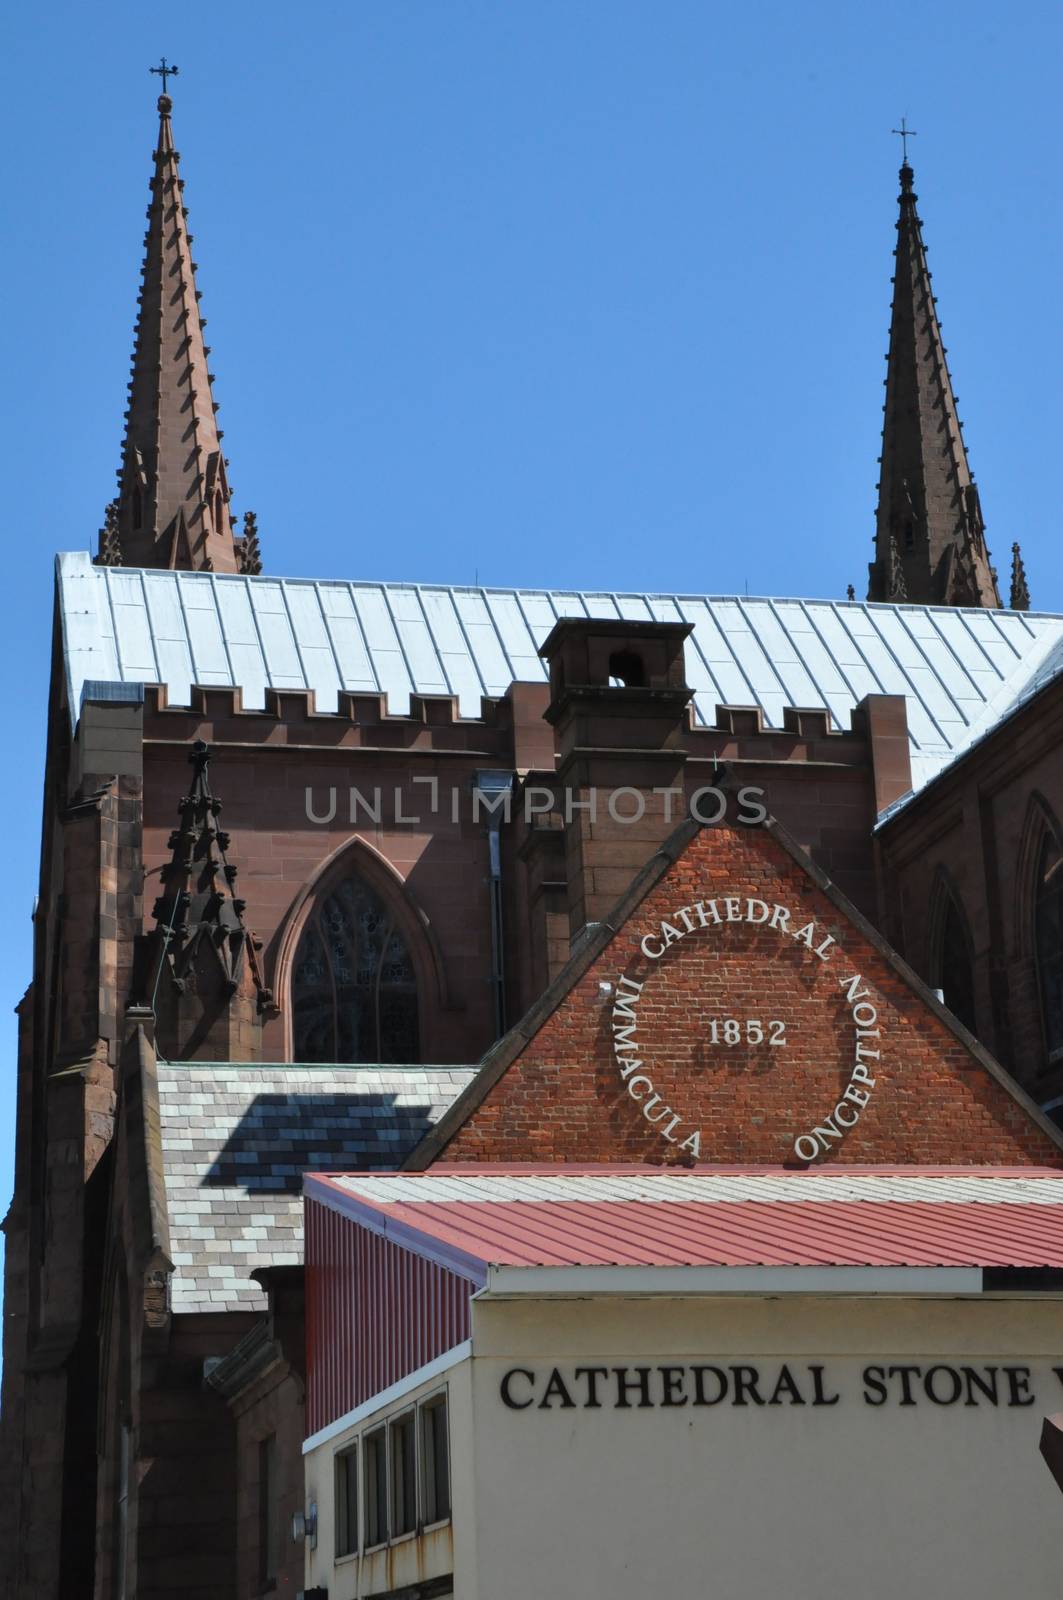 Cathedral of the Immaculate Conception in Albany, New York by sainaniritu